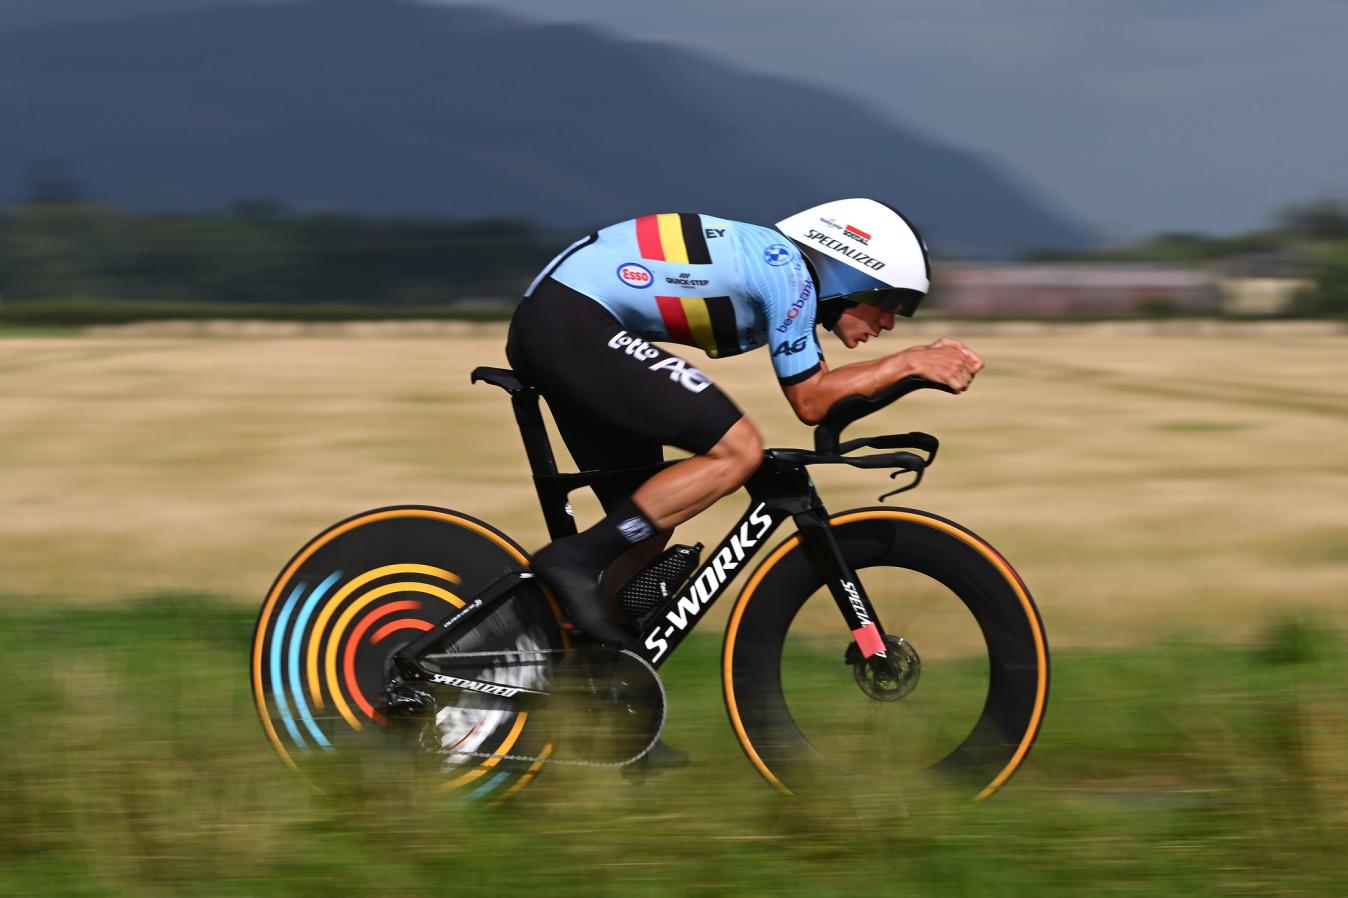 Remco Evenepoel stormed to victory in the men’s time trial at the World Championships on Friday afternoon